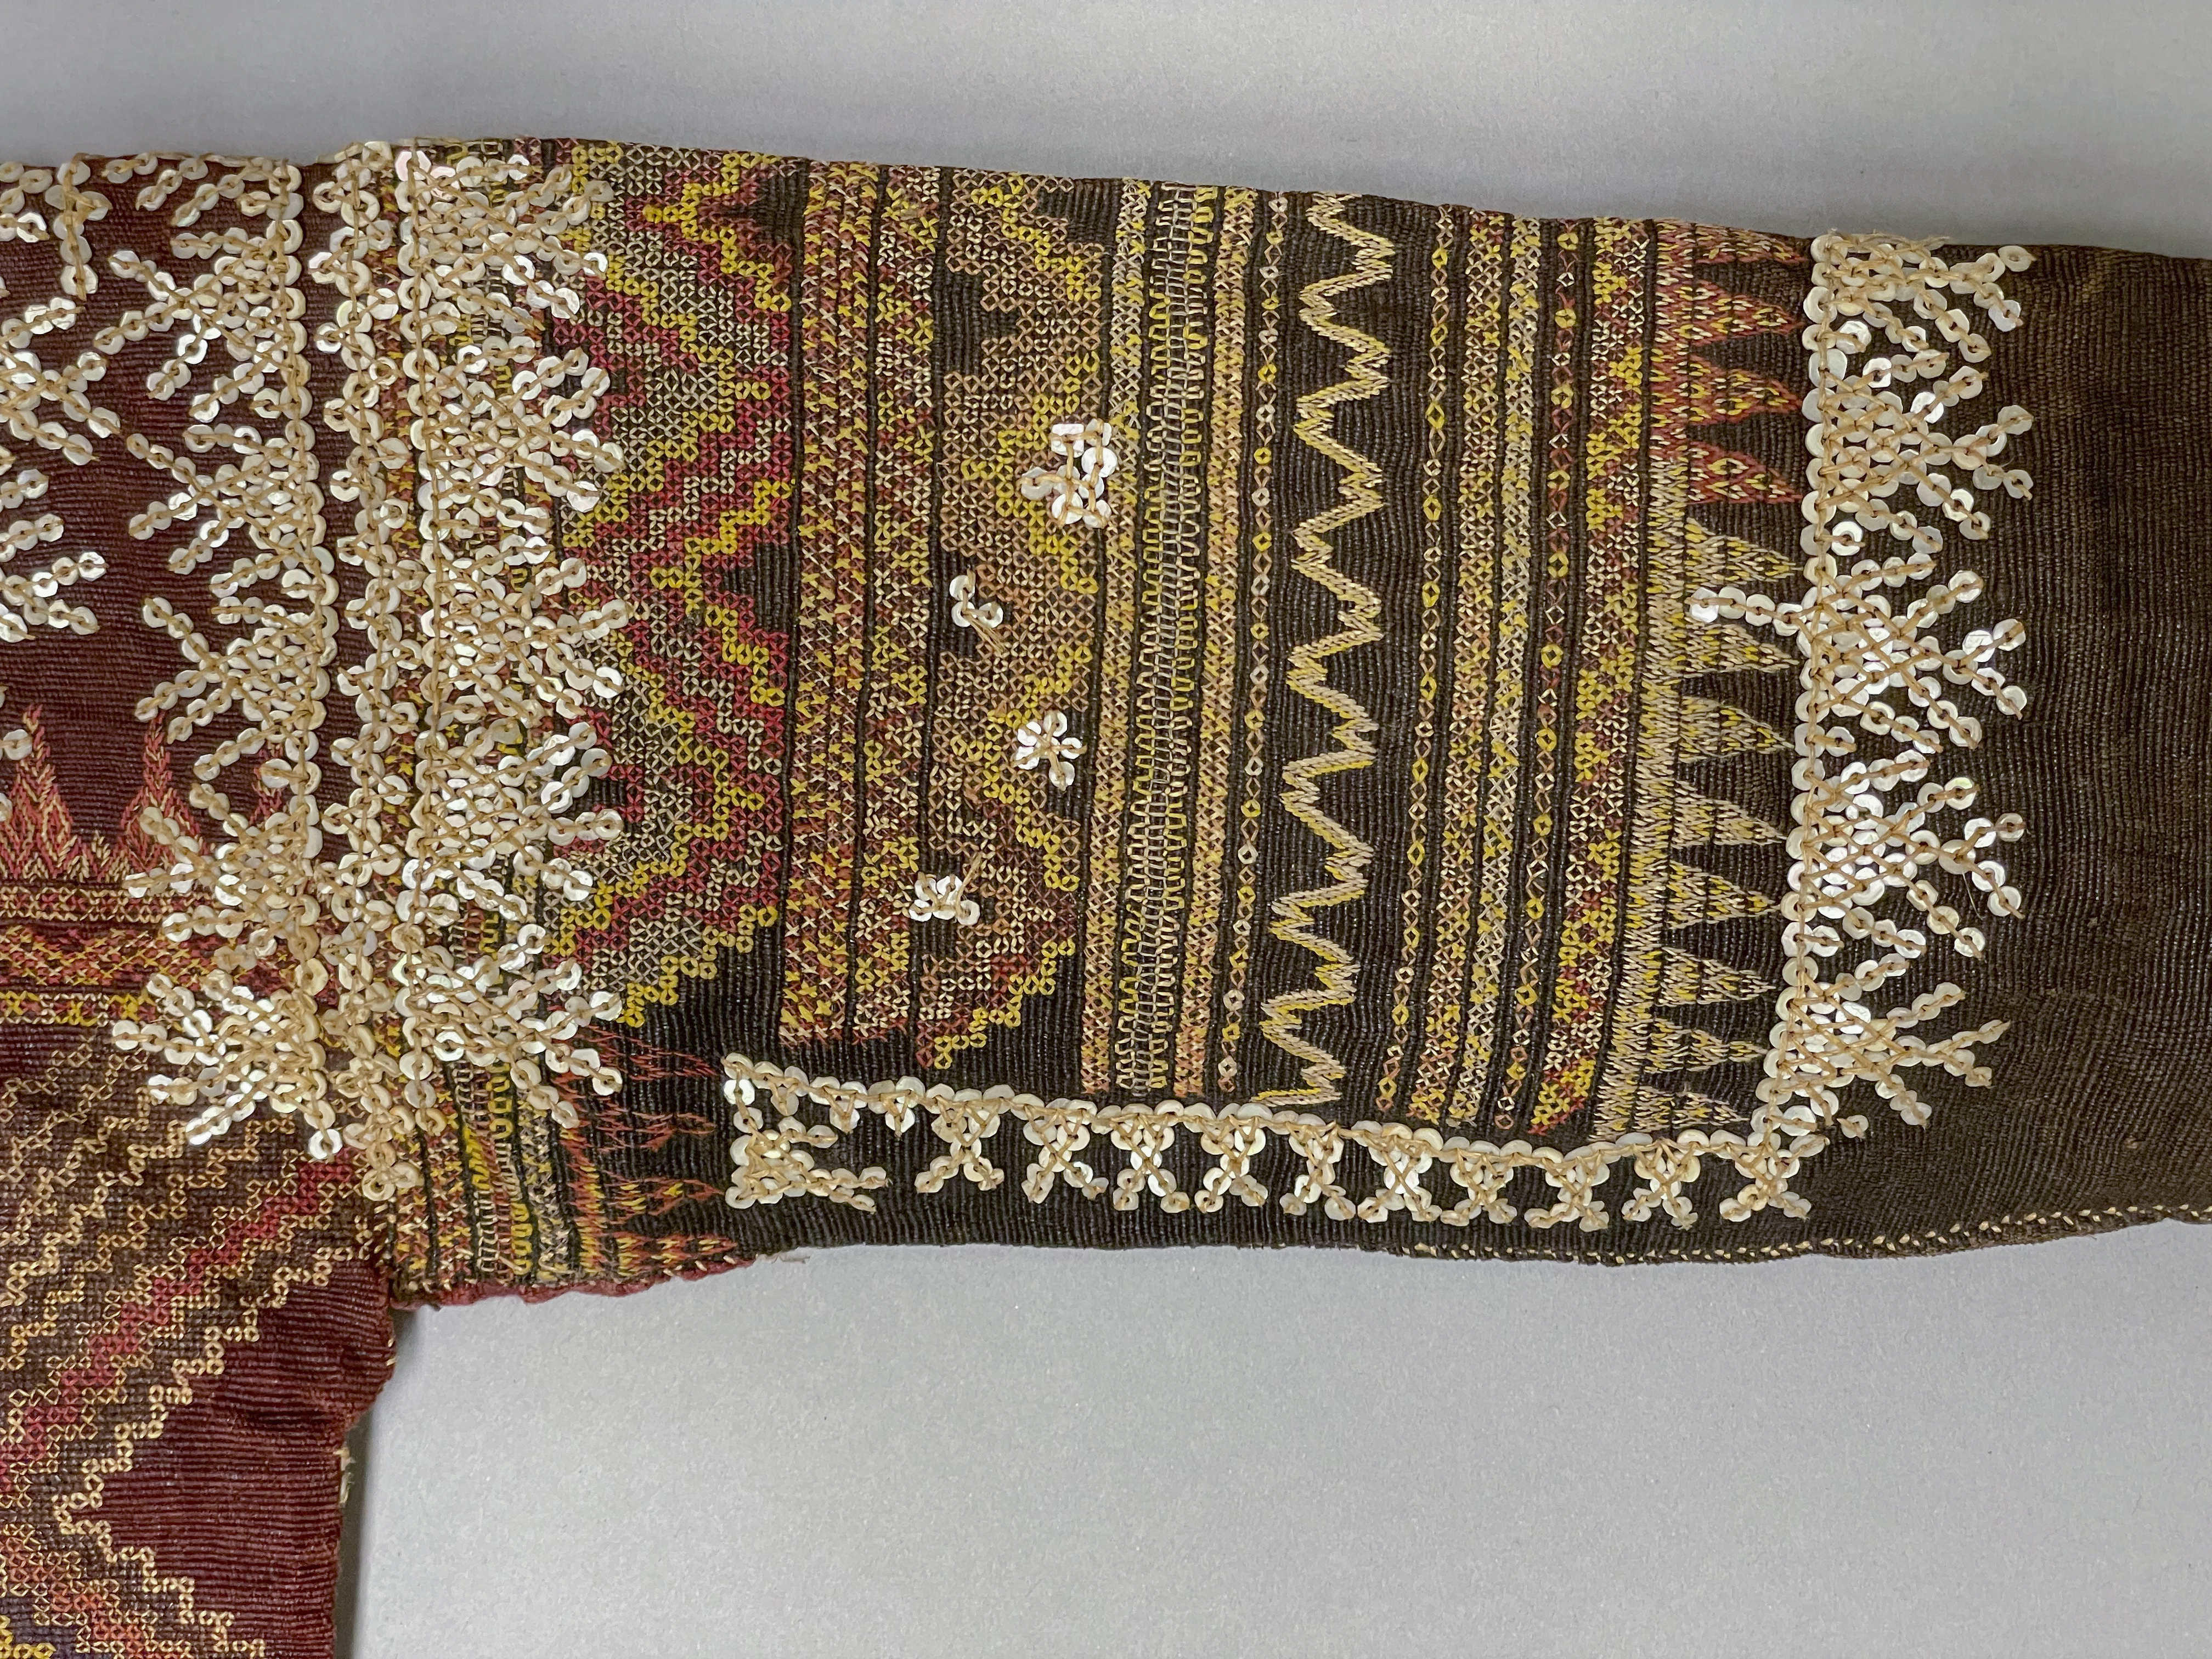 detail view of back proper right sleeve (c) Field Museum of Natural History - CC BY-NC 4.0